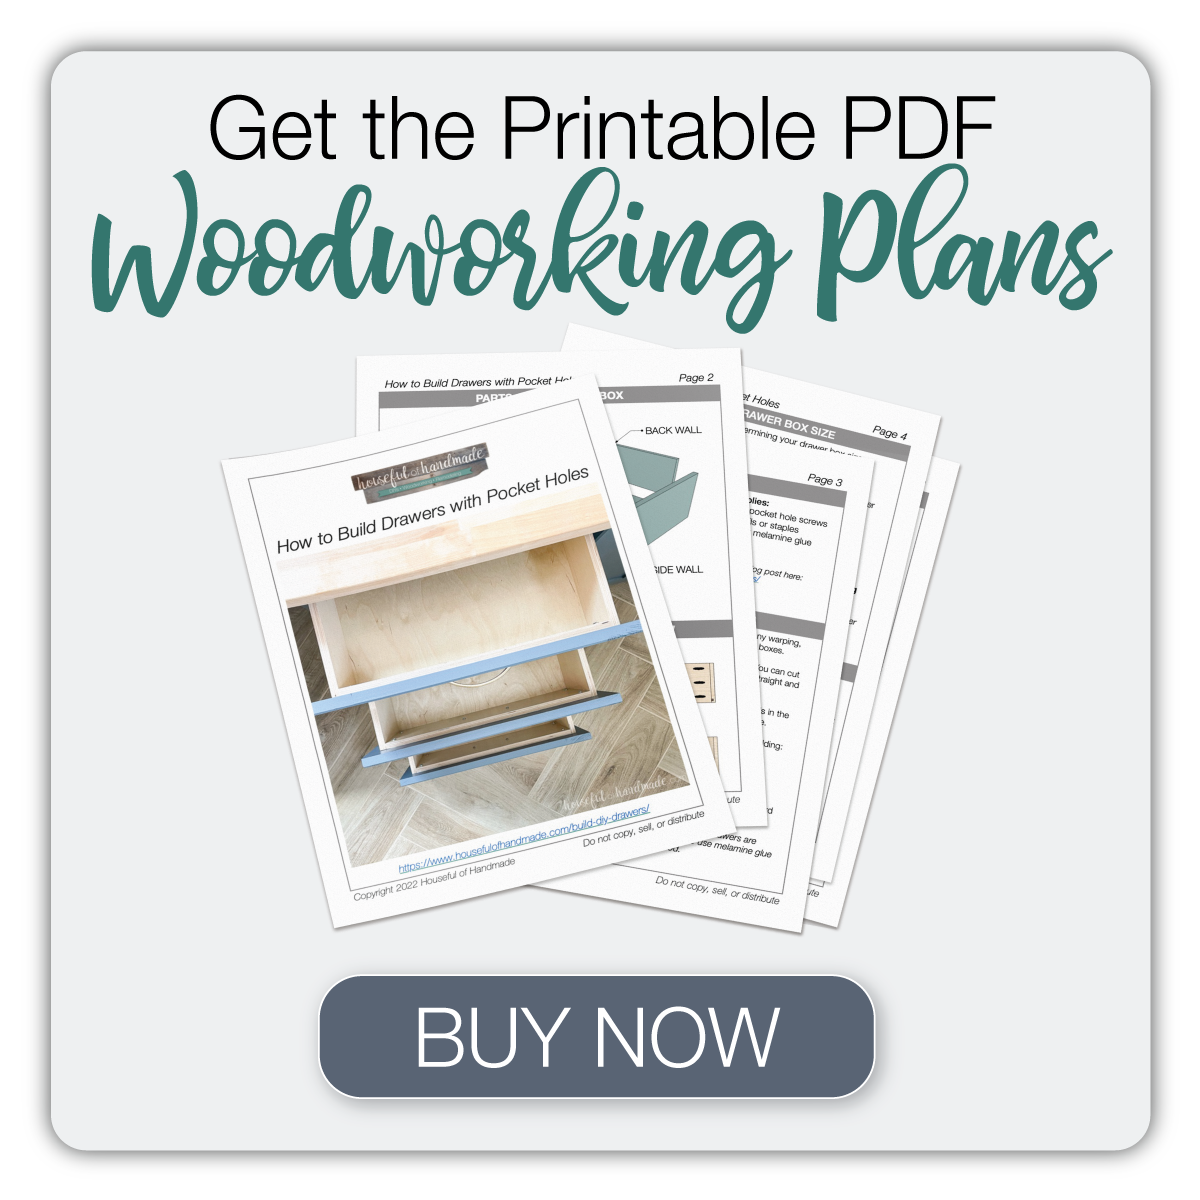 Button to buy the printable PDF woodworking plans for building drawers with pocket holes. 